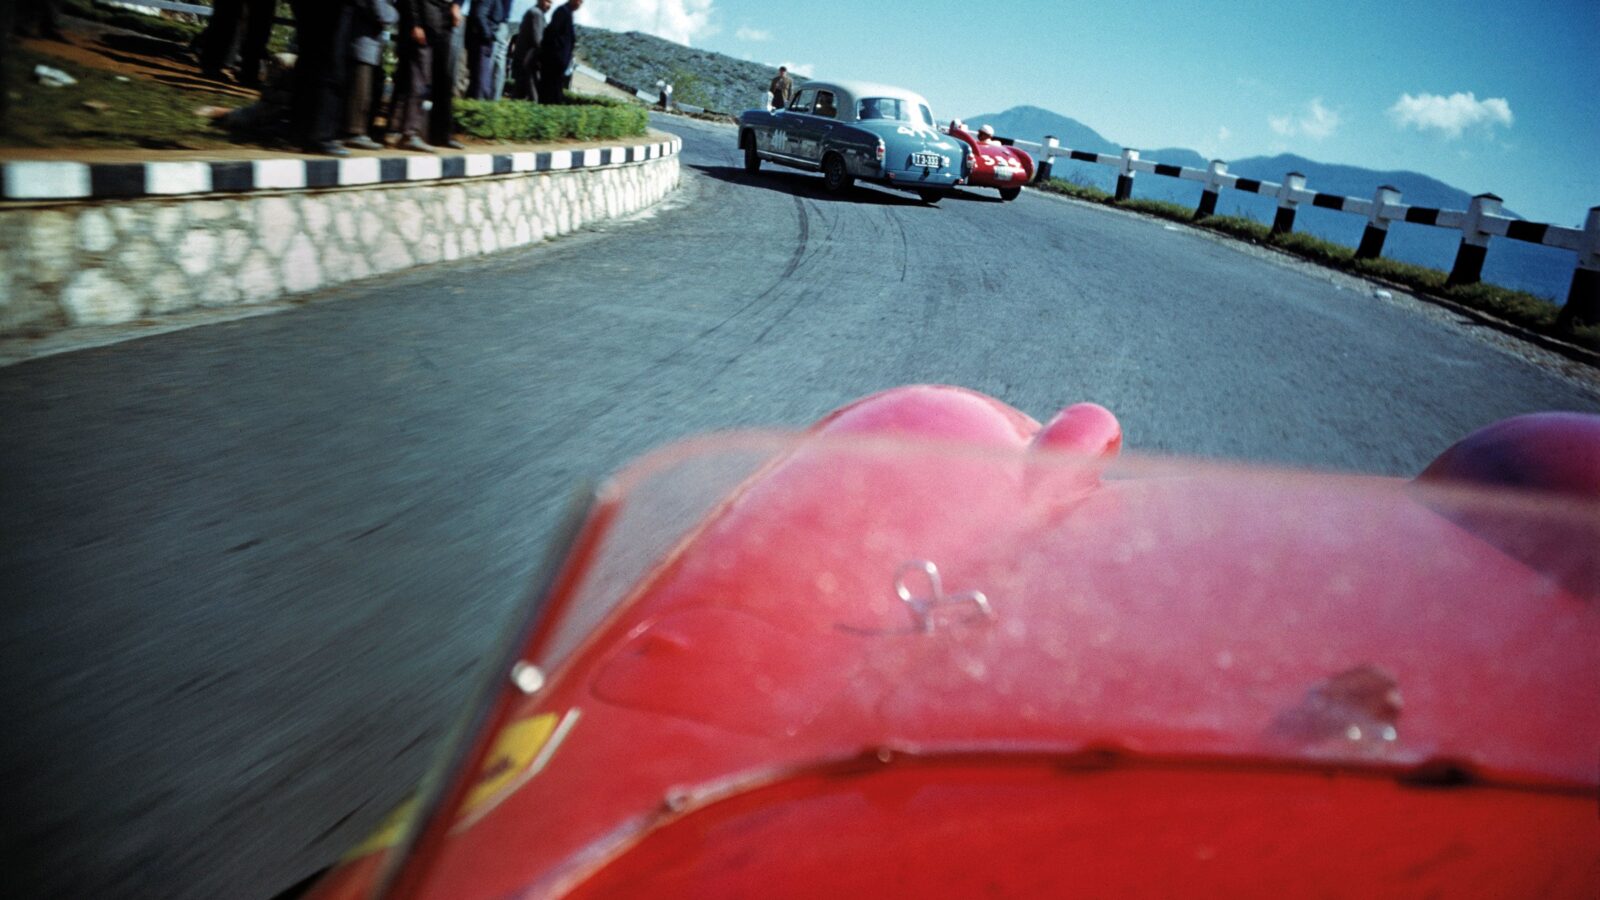 In 1957 Peter Collins on the Mille Miglia in the Ferrari 335 S